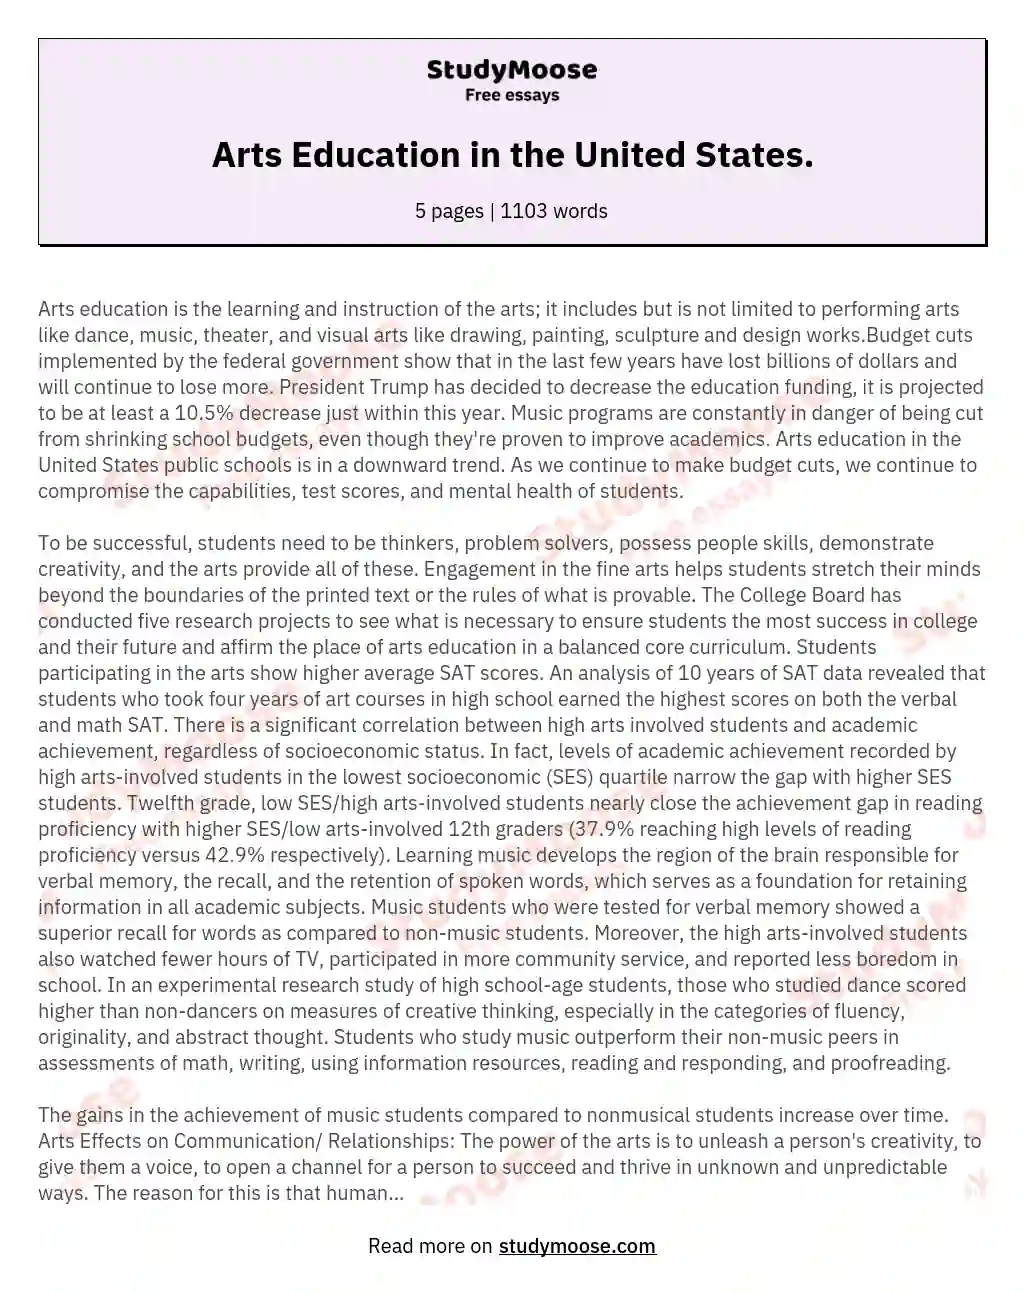 Arts Education in the United States. essay